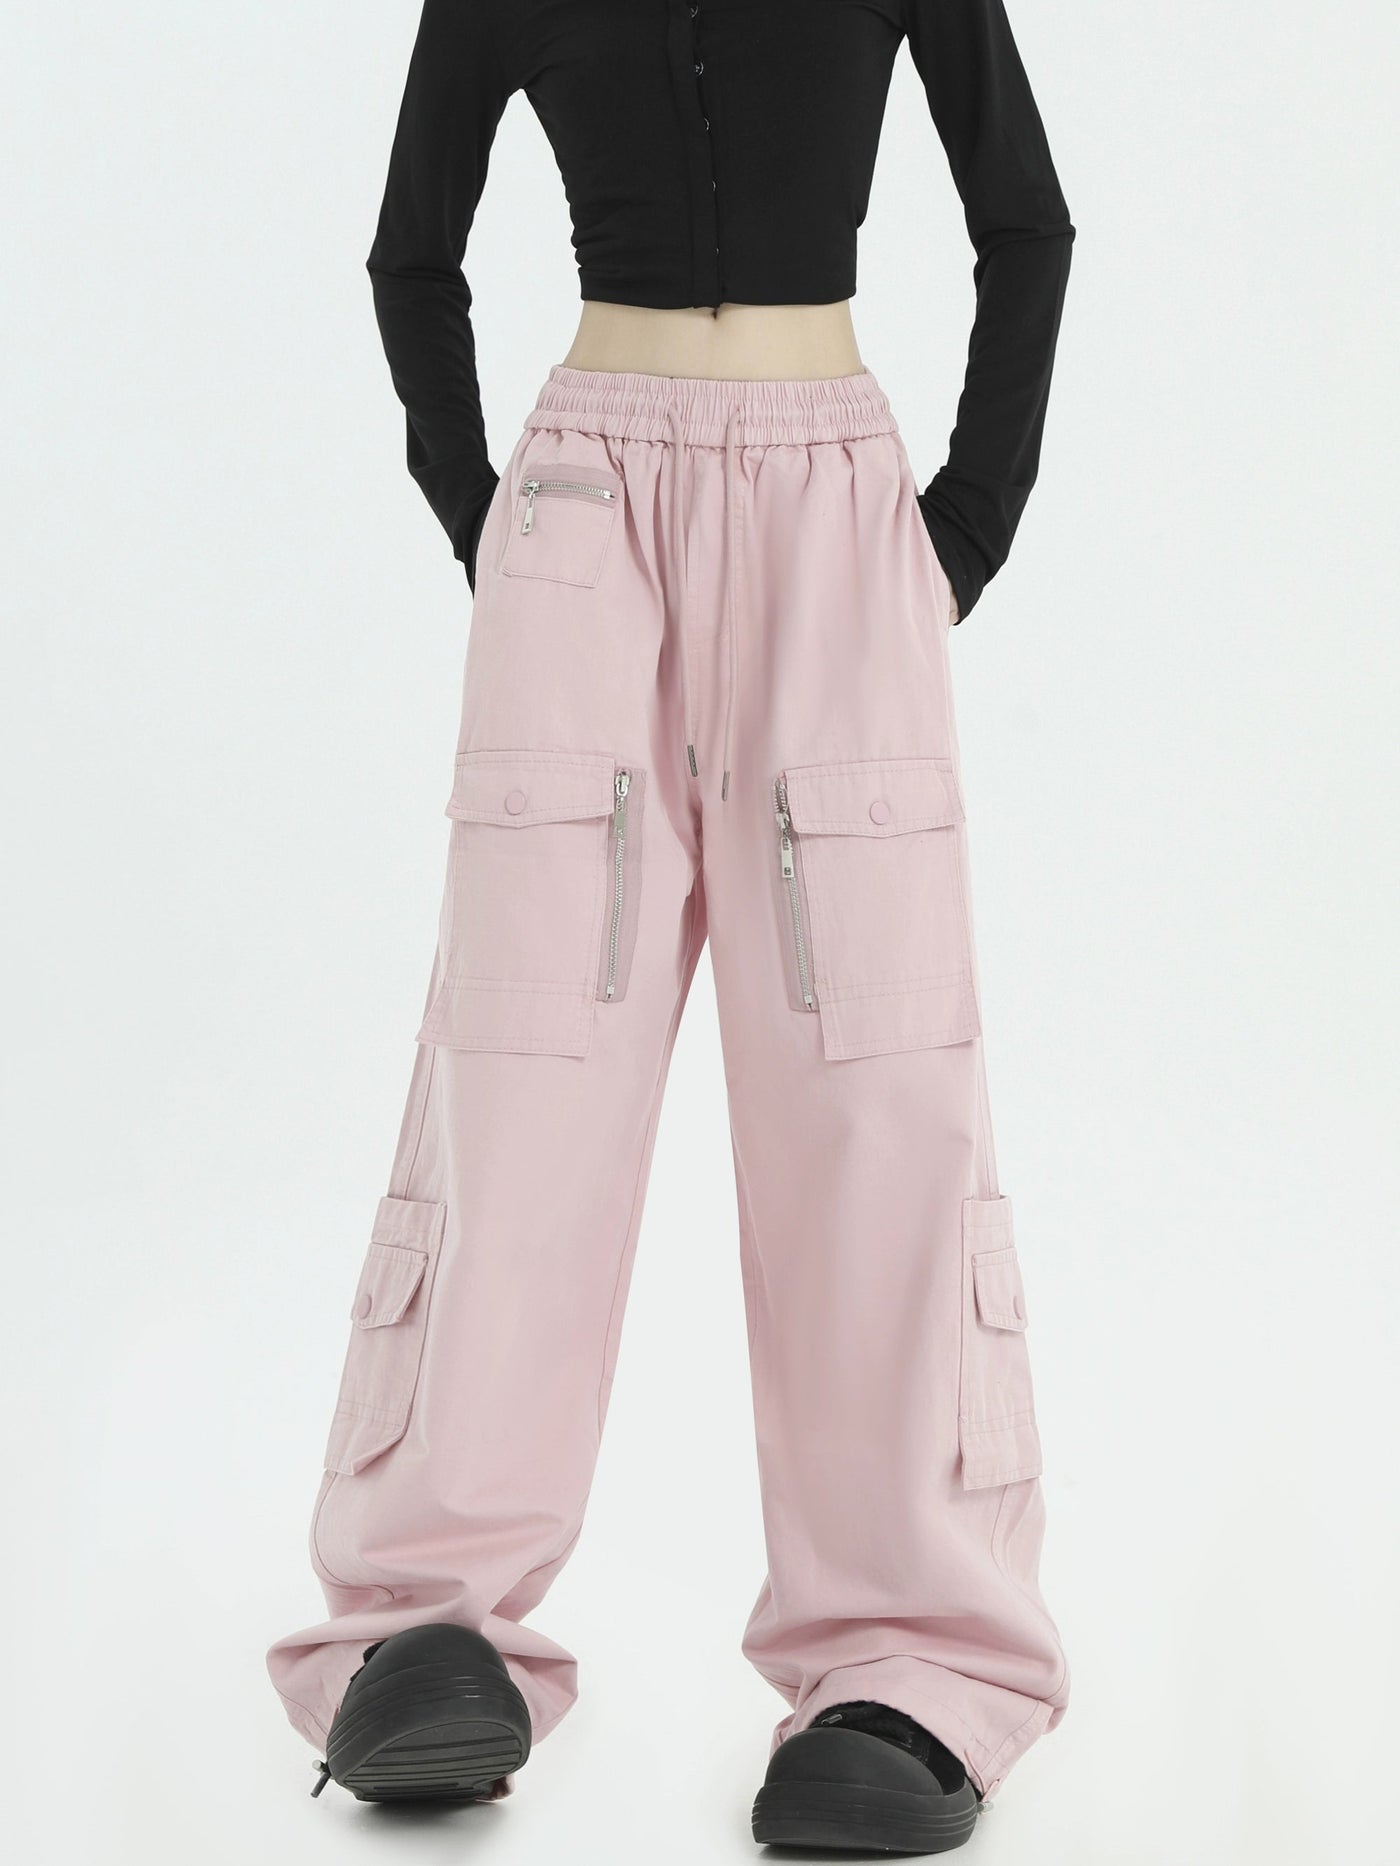 Multi-Zip and Pockets Track Pants Korean Street Fashion Pants By INS Korea Shop Online at OH Vault